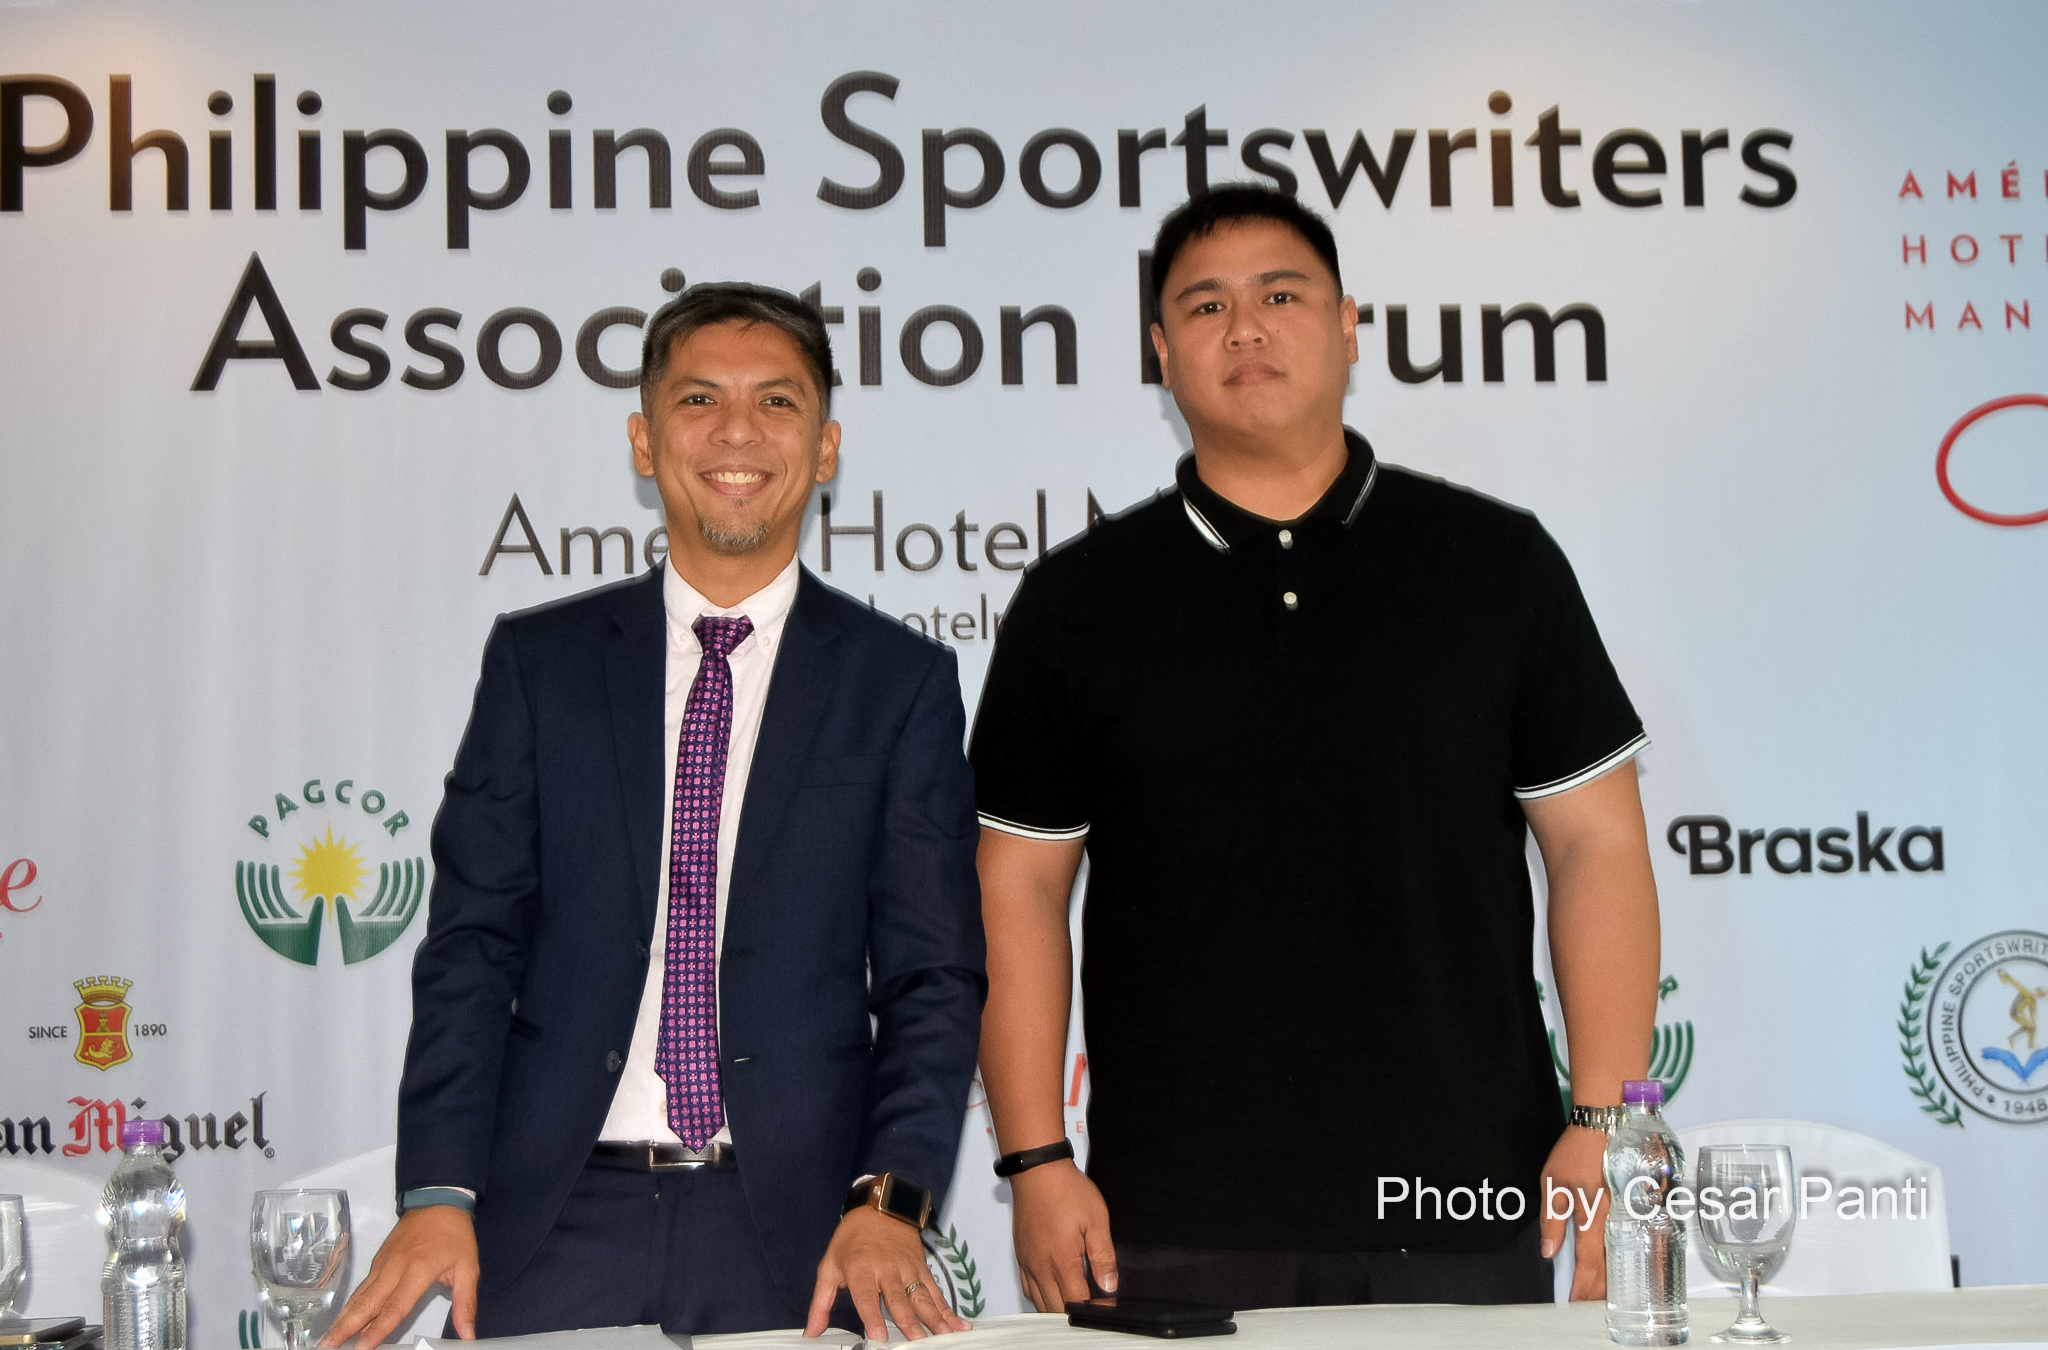 UAAP basketball to implement new officiating rules in Season 82